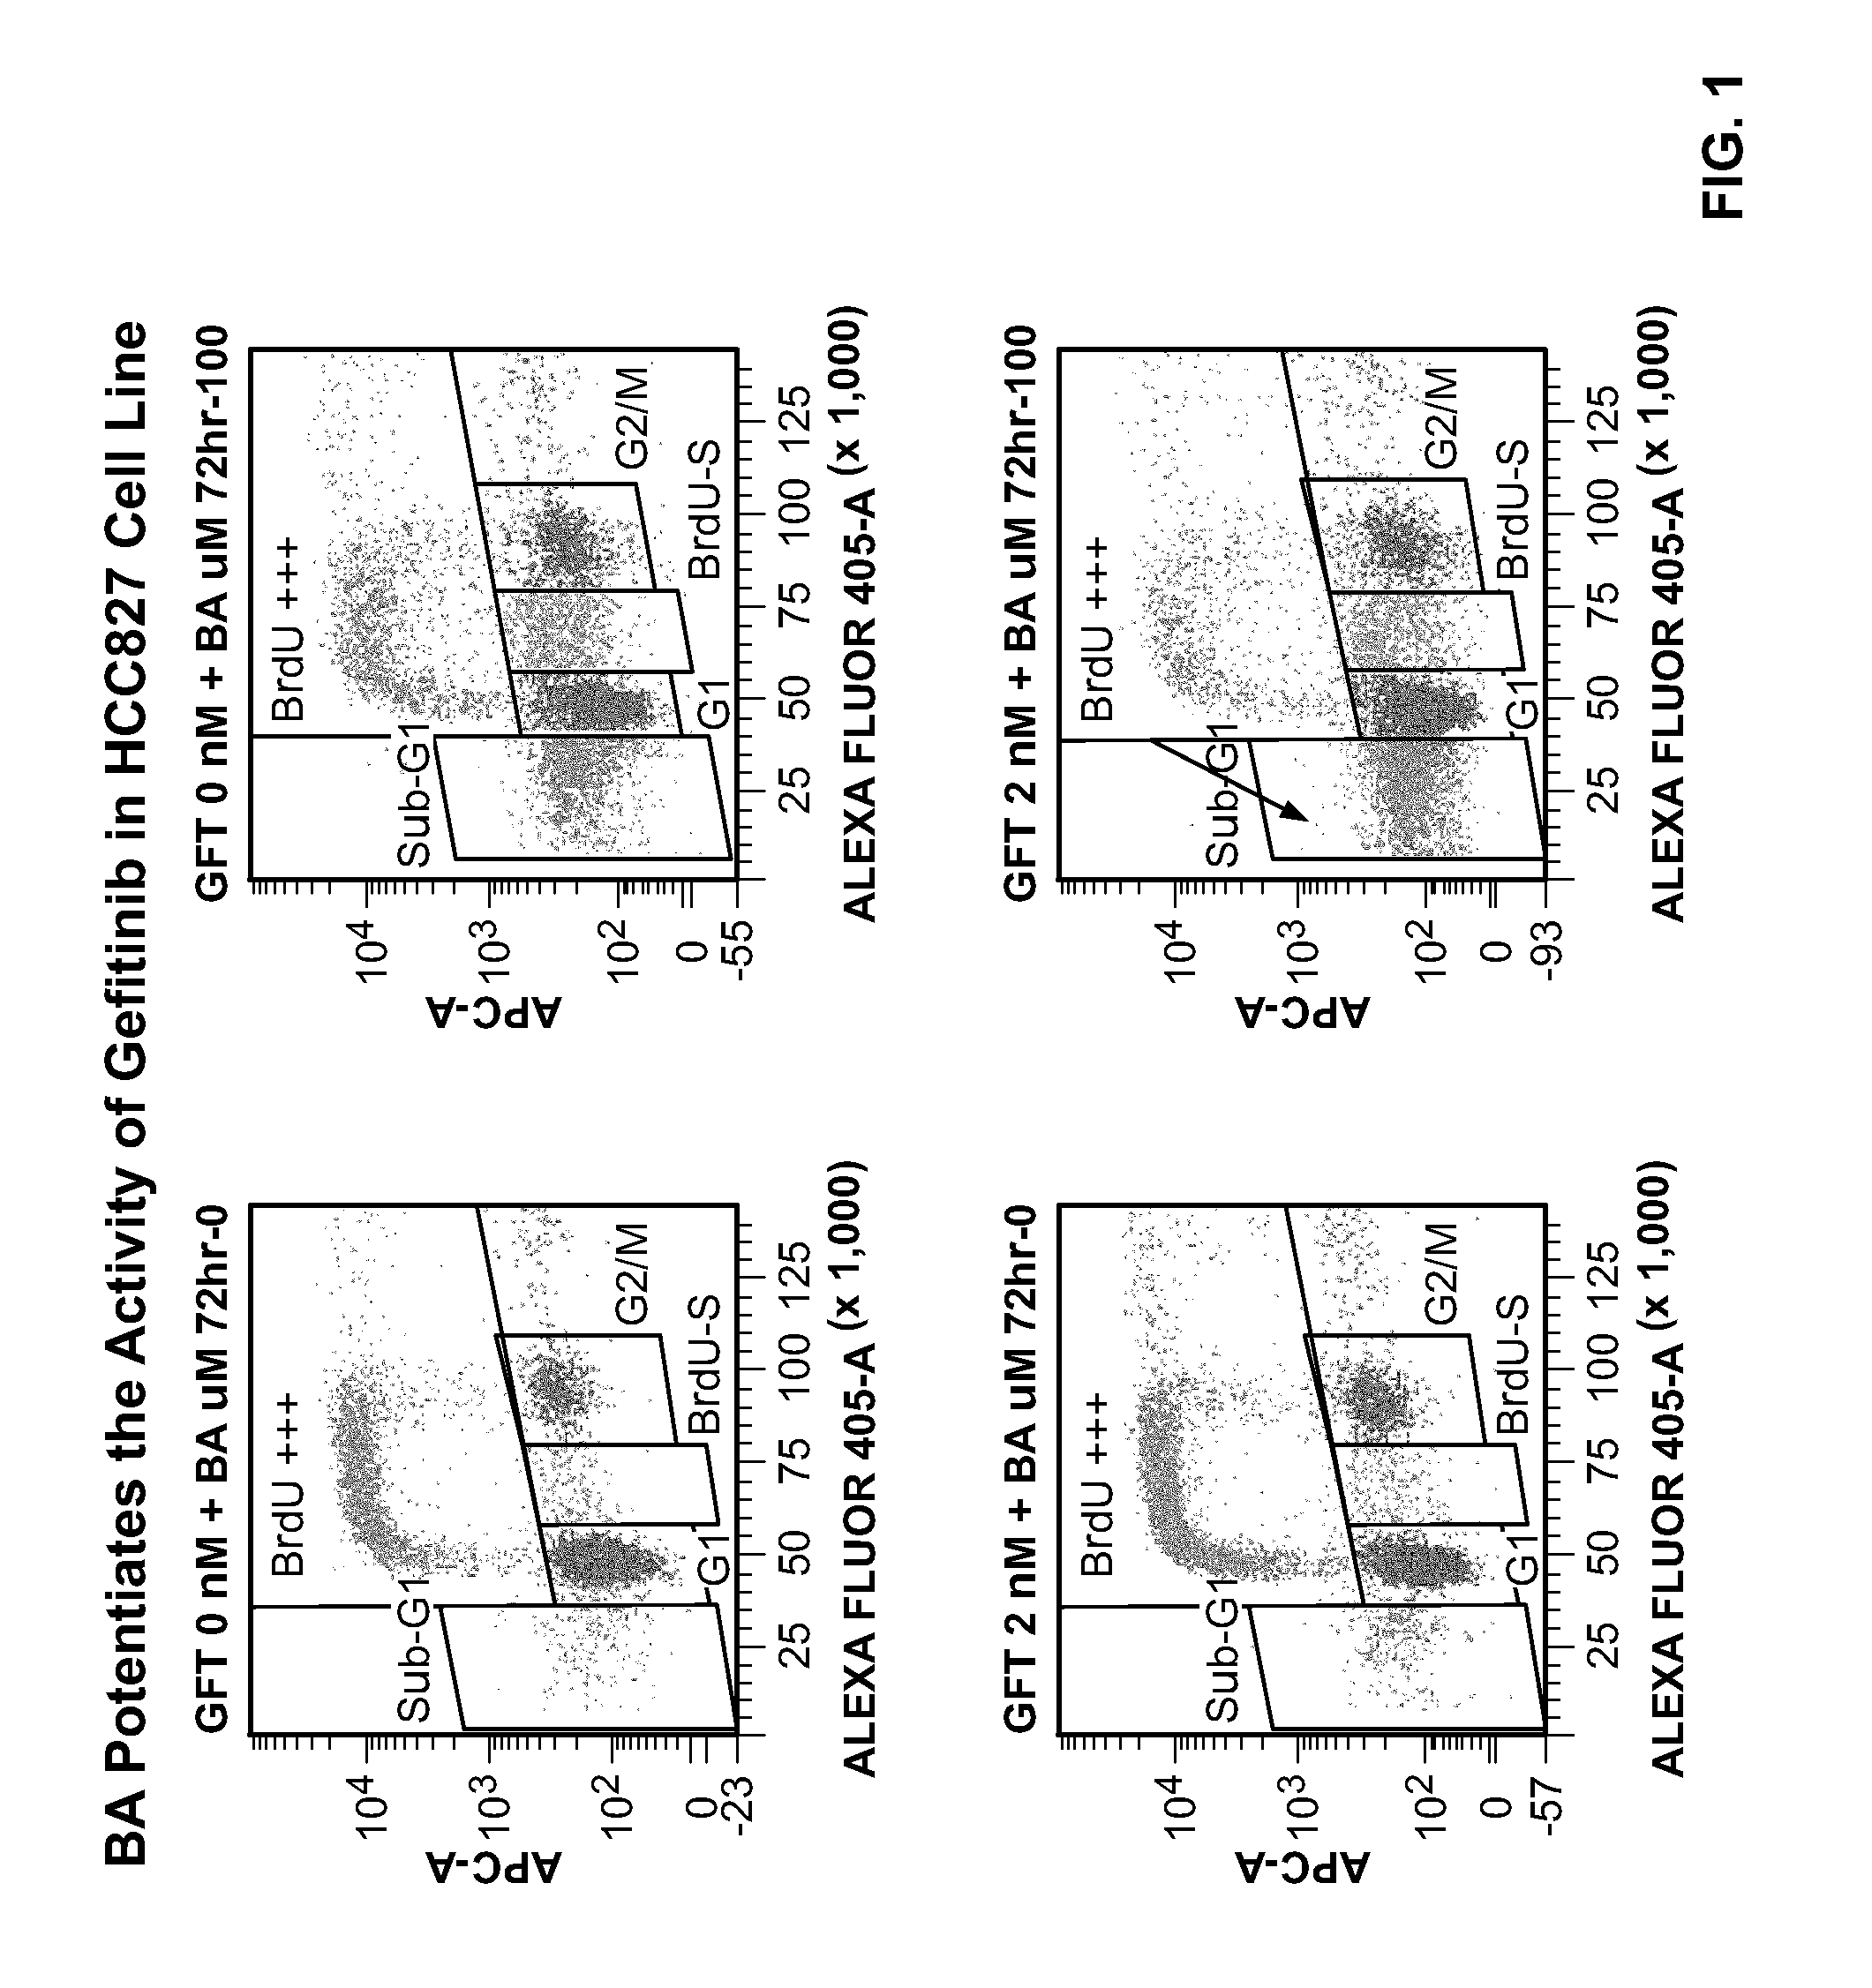 Treatment of lung cancer with a nitrobenzamide compound in combination with a growth factor inhibitor